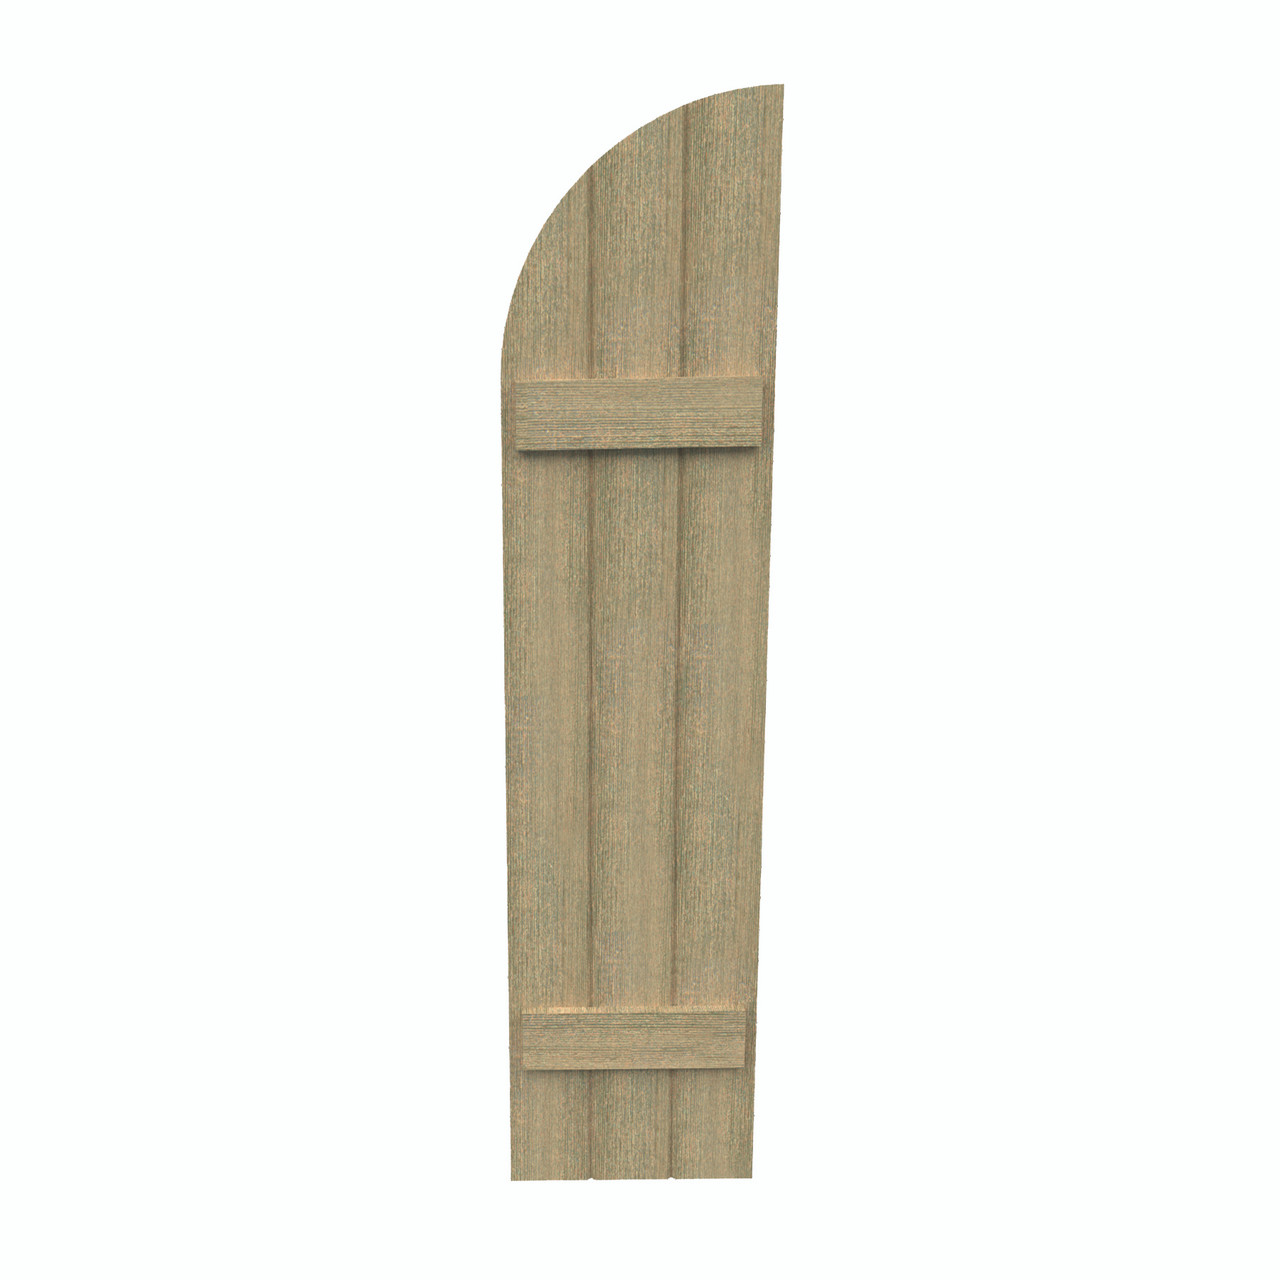 14 inch by 95 inch Quarter Round Shutter with 3-Boards